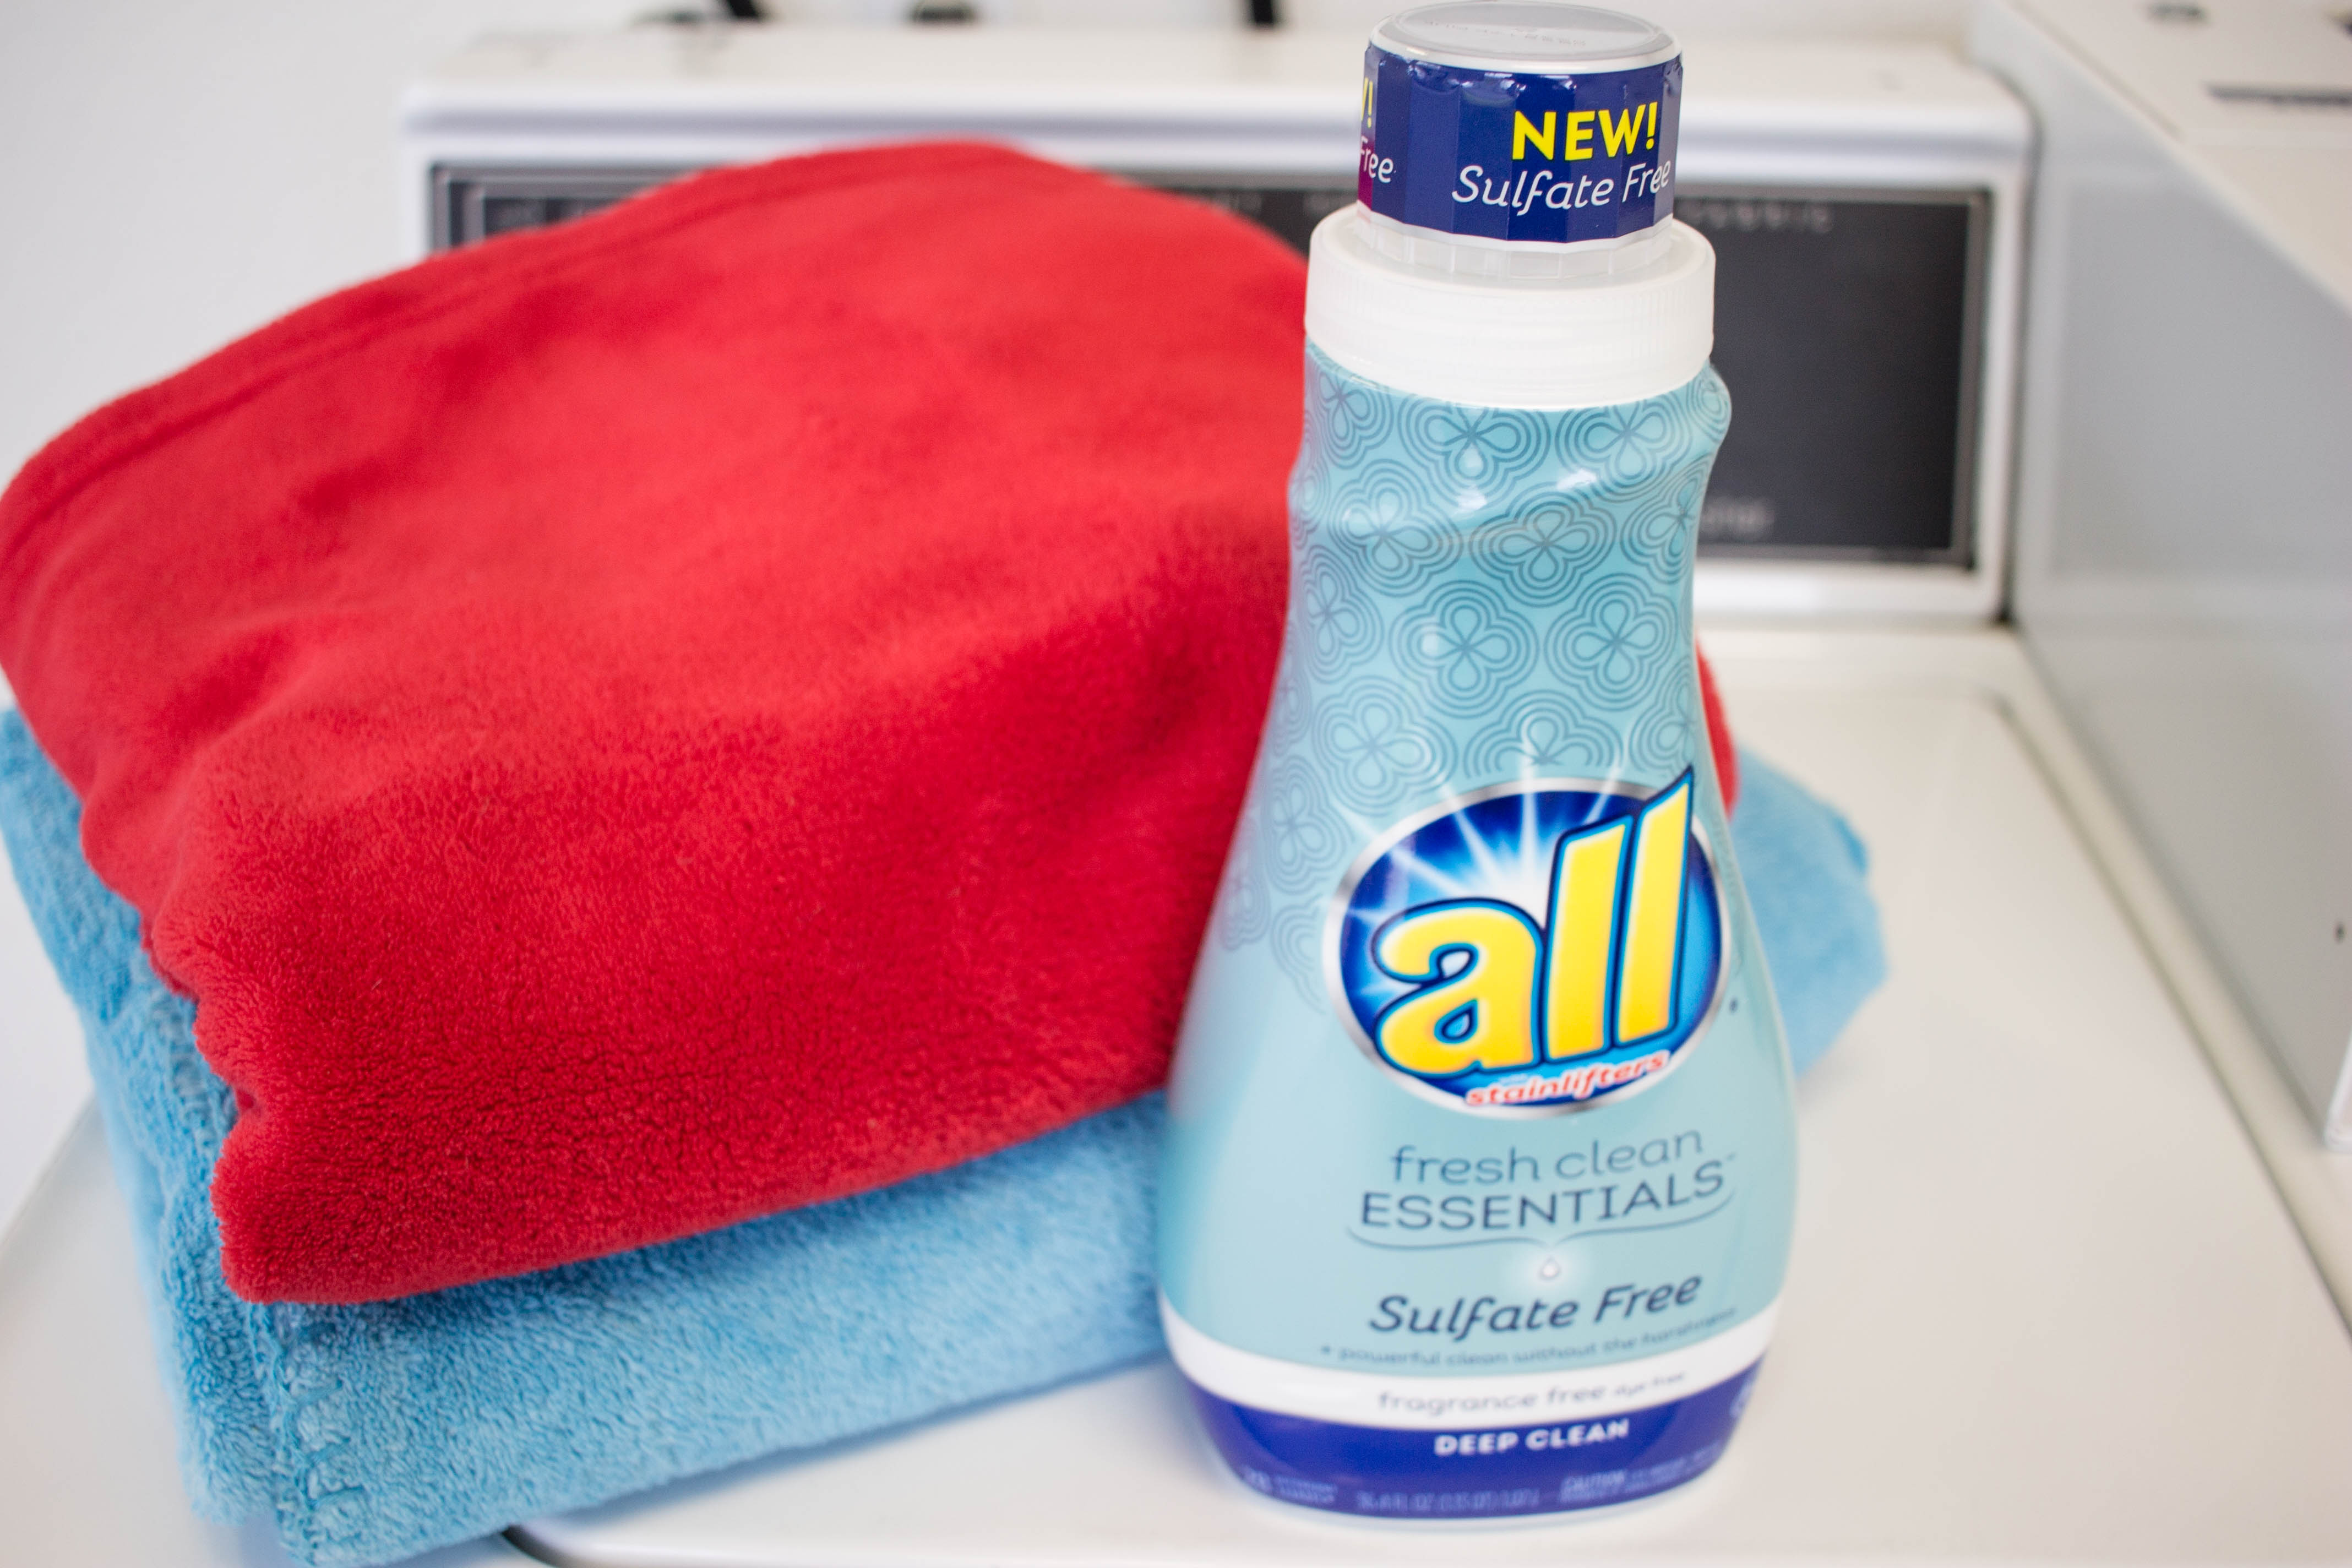 All sulfate free gives your laundry a powerful clean without all the harshness